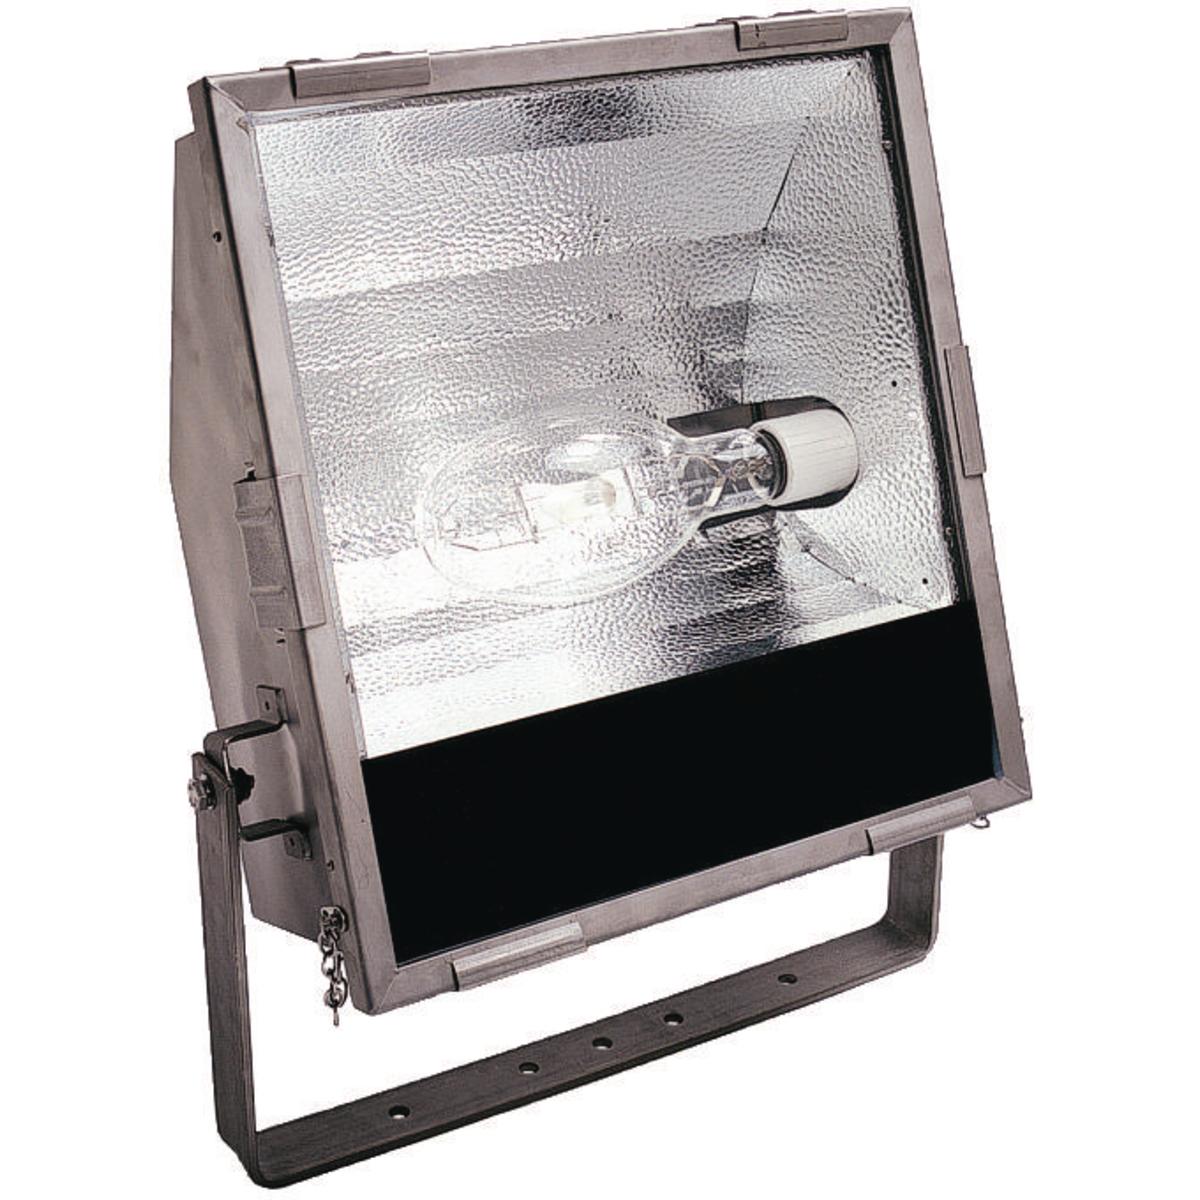 Hubbell KFS400SS-NR KFSS Series - Stainless Steel 400 Watt High Pressure Sodium Ex nR Marine Floodlight (Lamp Not Included) - Quadri-Volt (120/208/240/277V) At 60Hz  ; Type 316 Stainless Steel Housing. 16-gauge housing ensures low corrosion and long life, reducing maintenanc